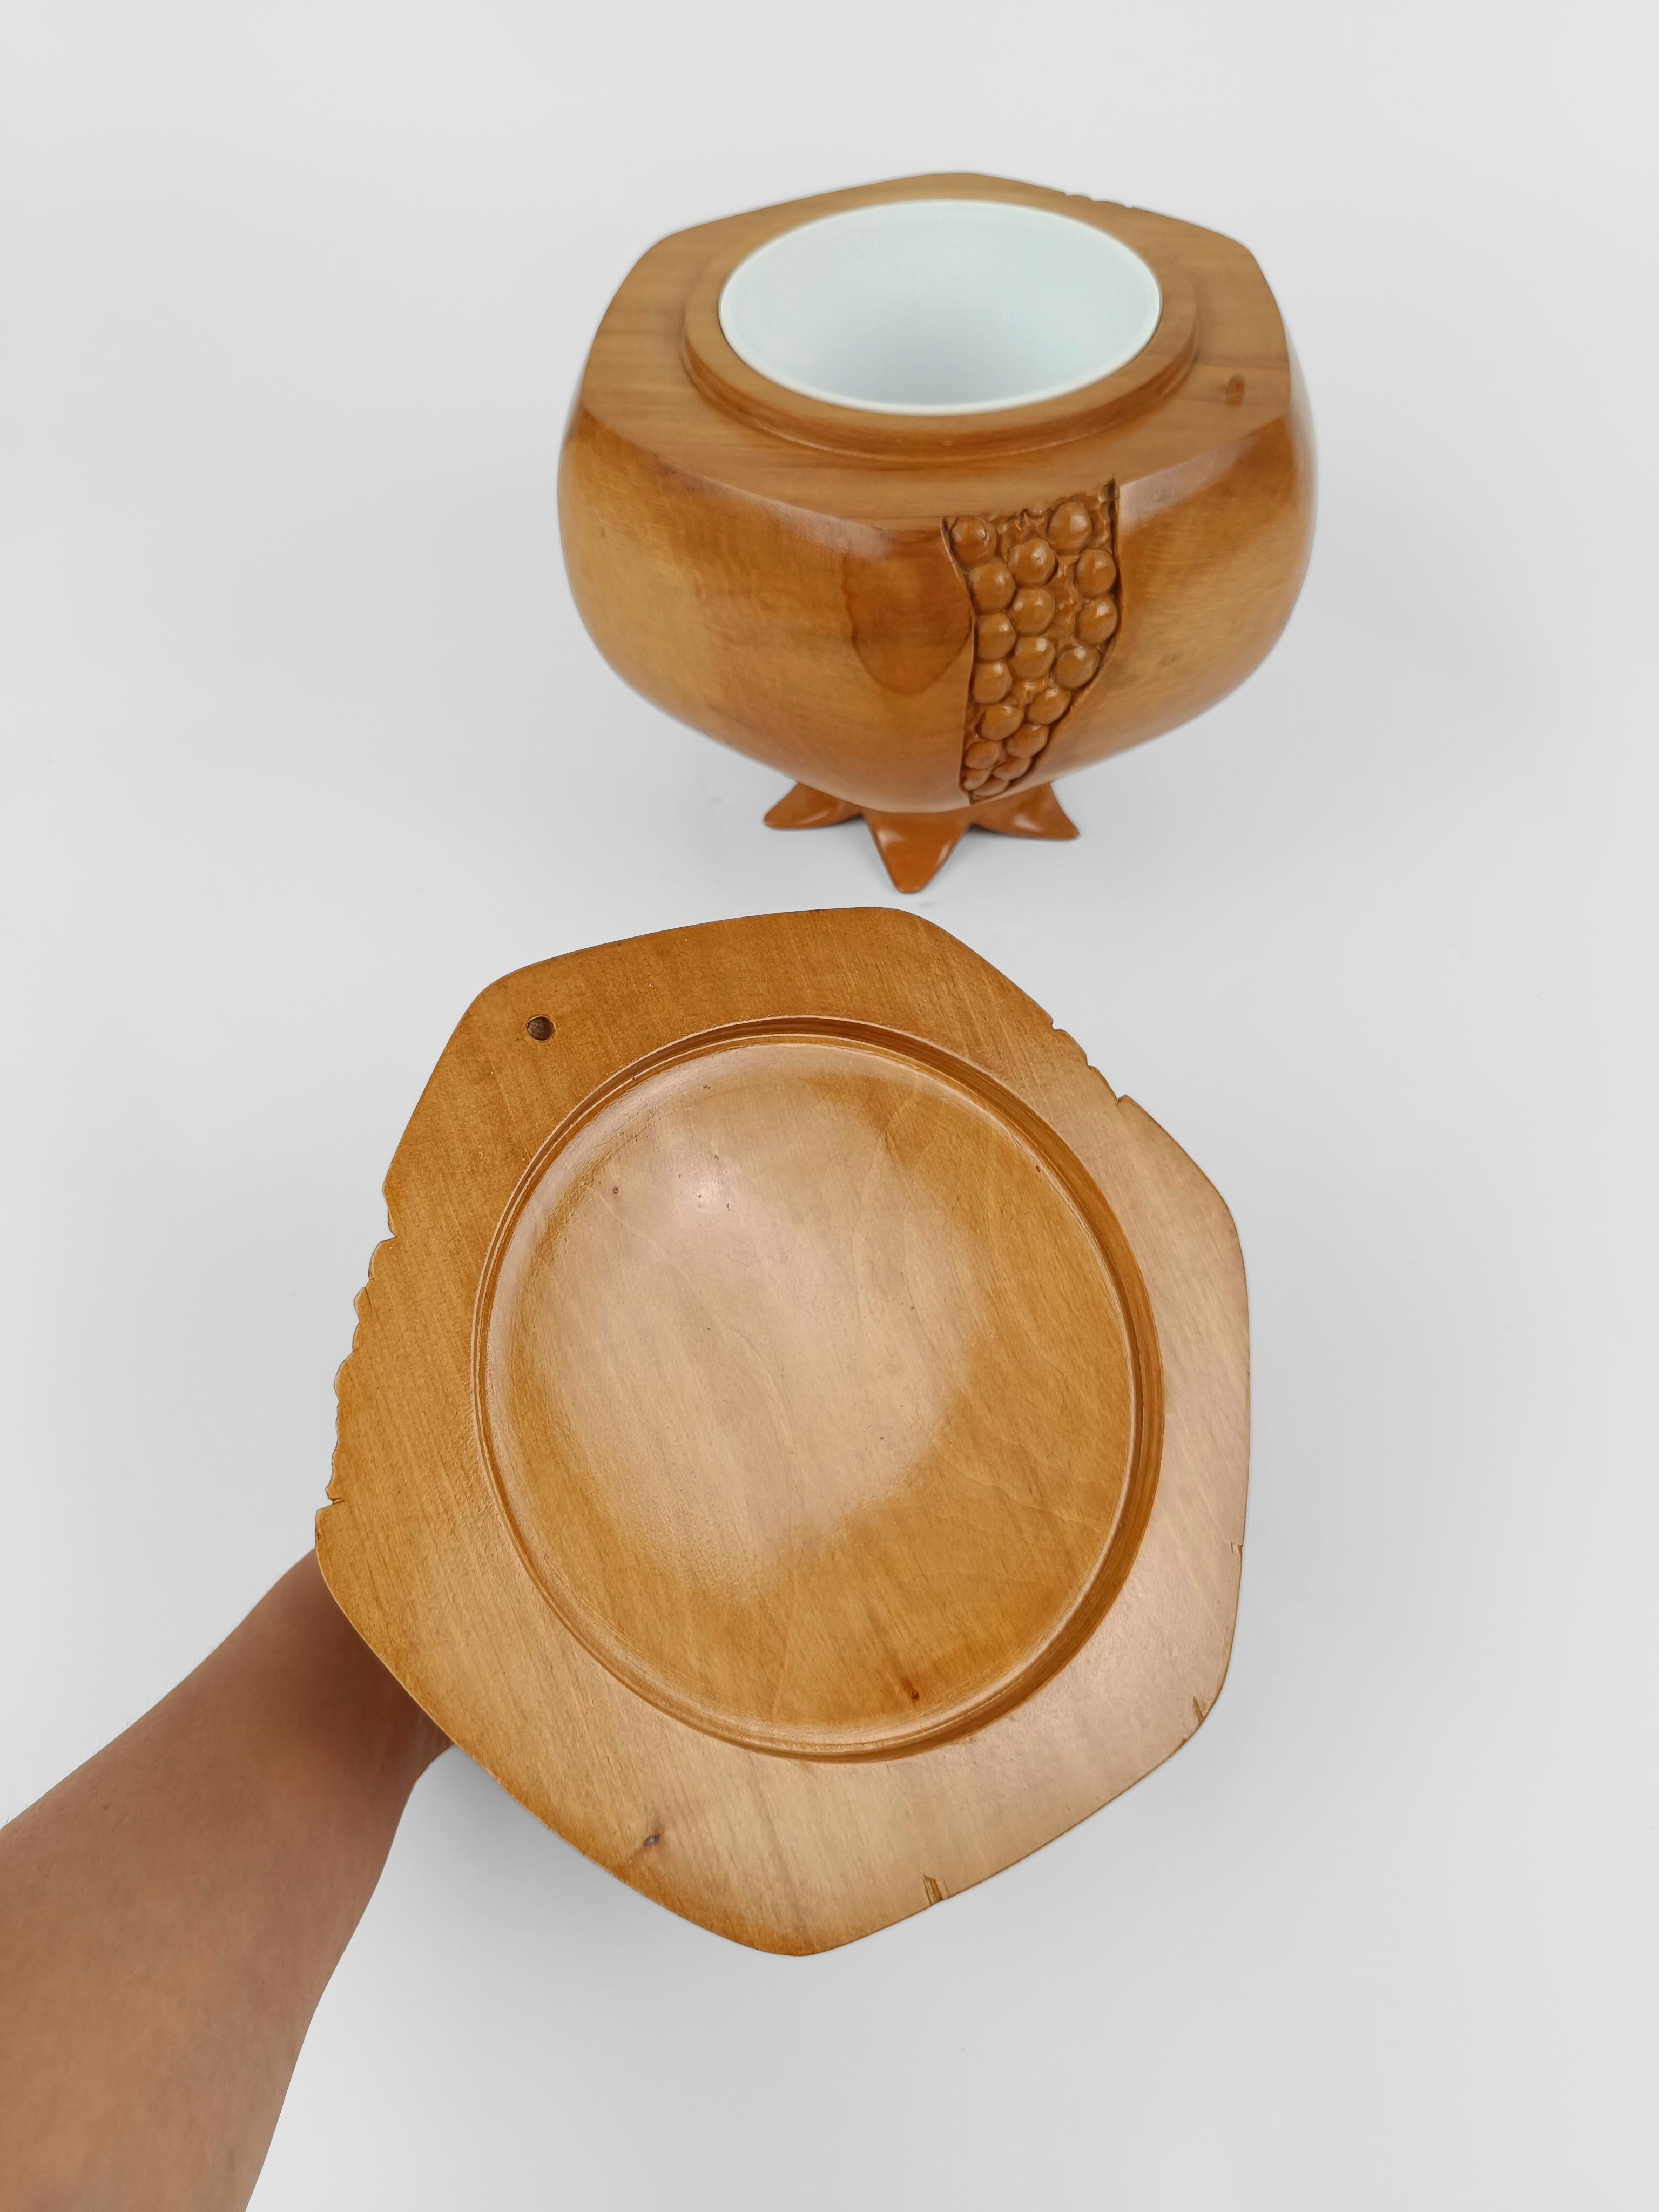 Sculptural Vintage Ice Bucket in maple wood carved in the shape of a pomegranate 5